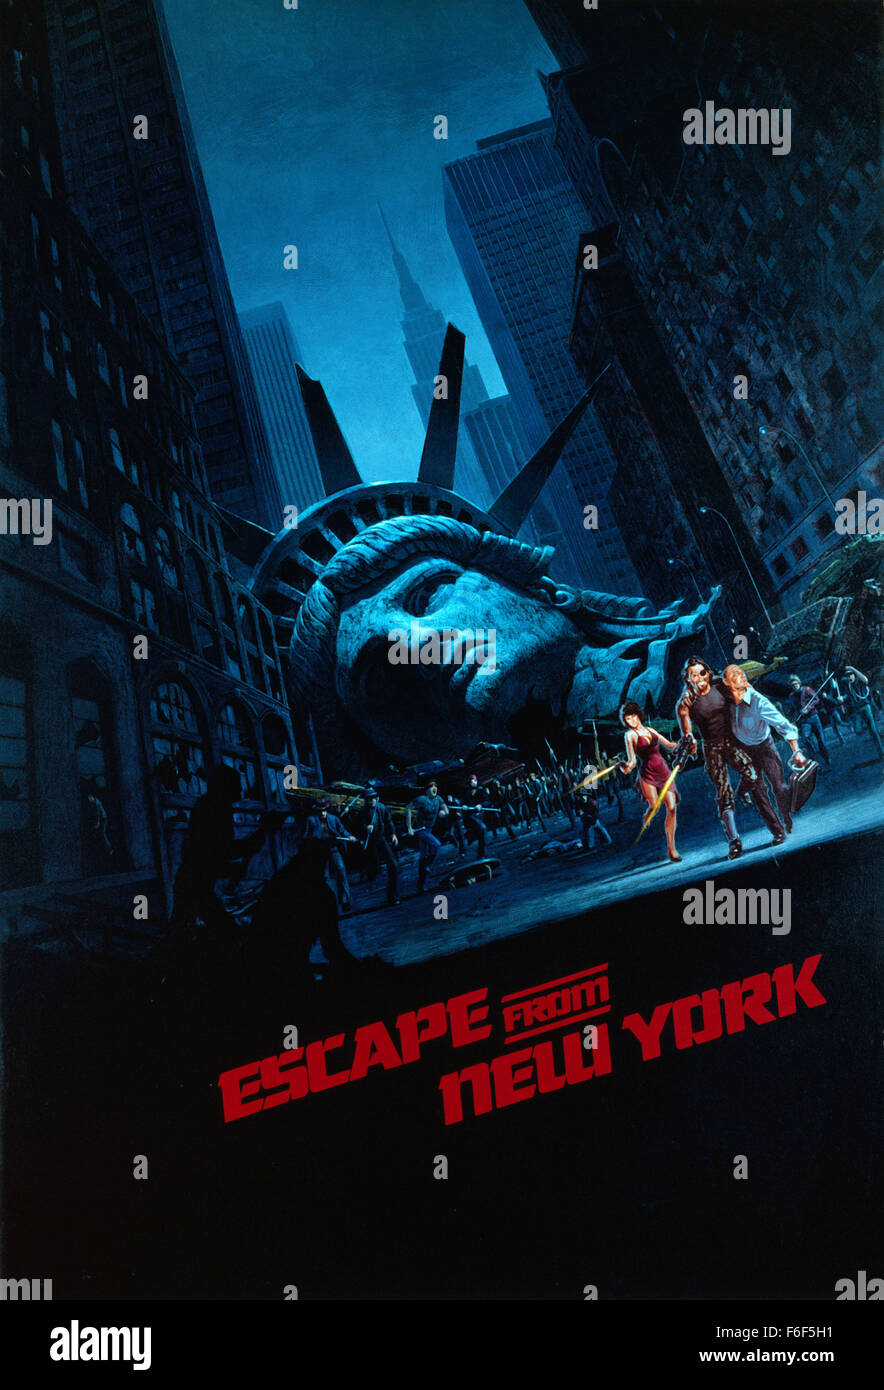 RELEASE DATE: July 10, 1981  MOVIE TITLE: Escape from New York  STUDIO: AVCO Embassy Picture  DIRECTOR: John Carpenter  PLOT: In 1997, when the US President crashes into Manhattan, now a giant max. security prison, a convicted bank robber is sent in for a rescue  PICTURED: Scene from movie  (Credit Image: c AVCO Embassy Picture/Entertainment Pictures) Stock Photo